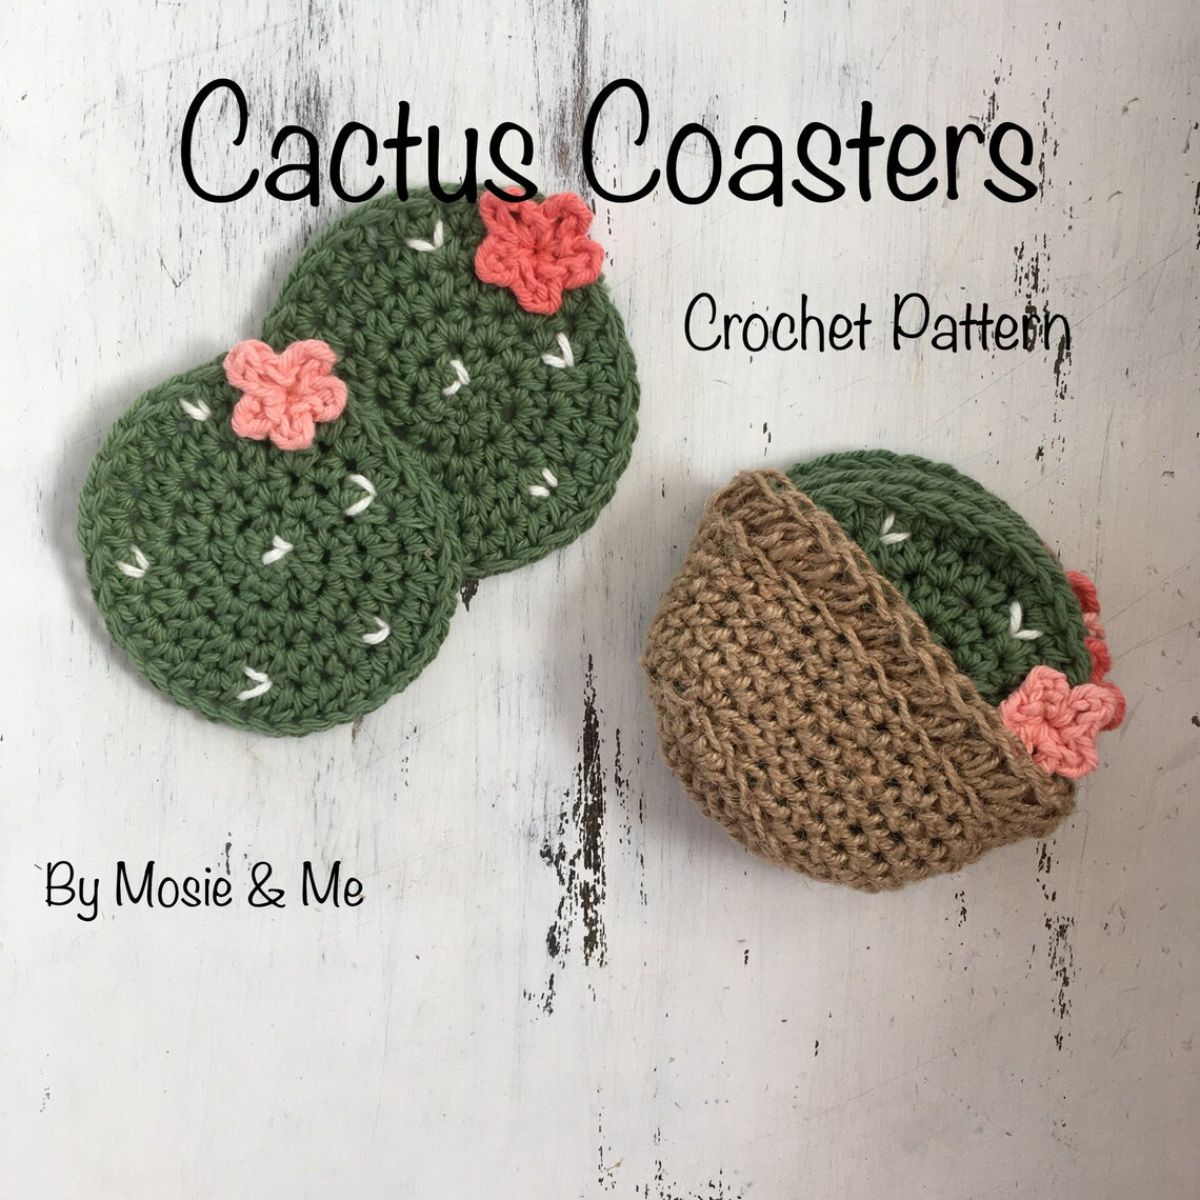 Green cactus style crochet coasters with white spots and pink flowers on top next to a brown crochet coaster holder.